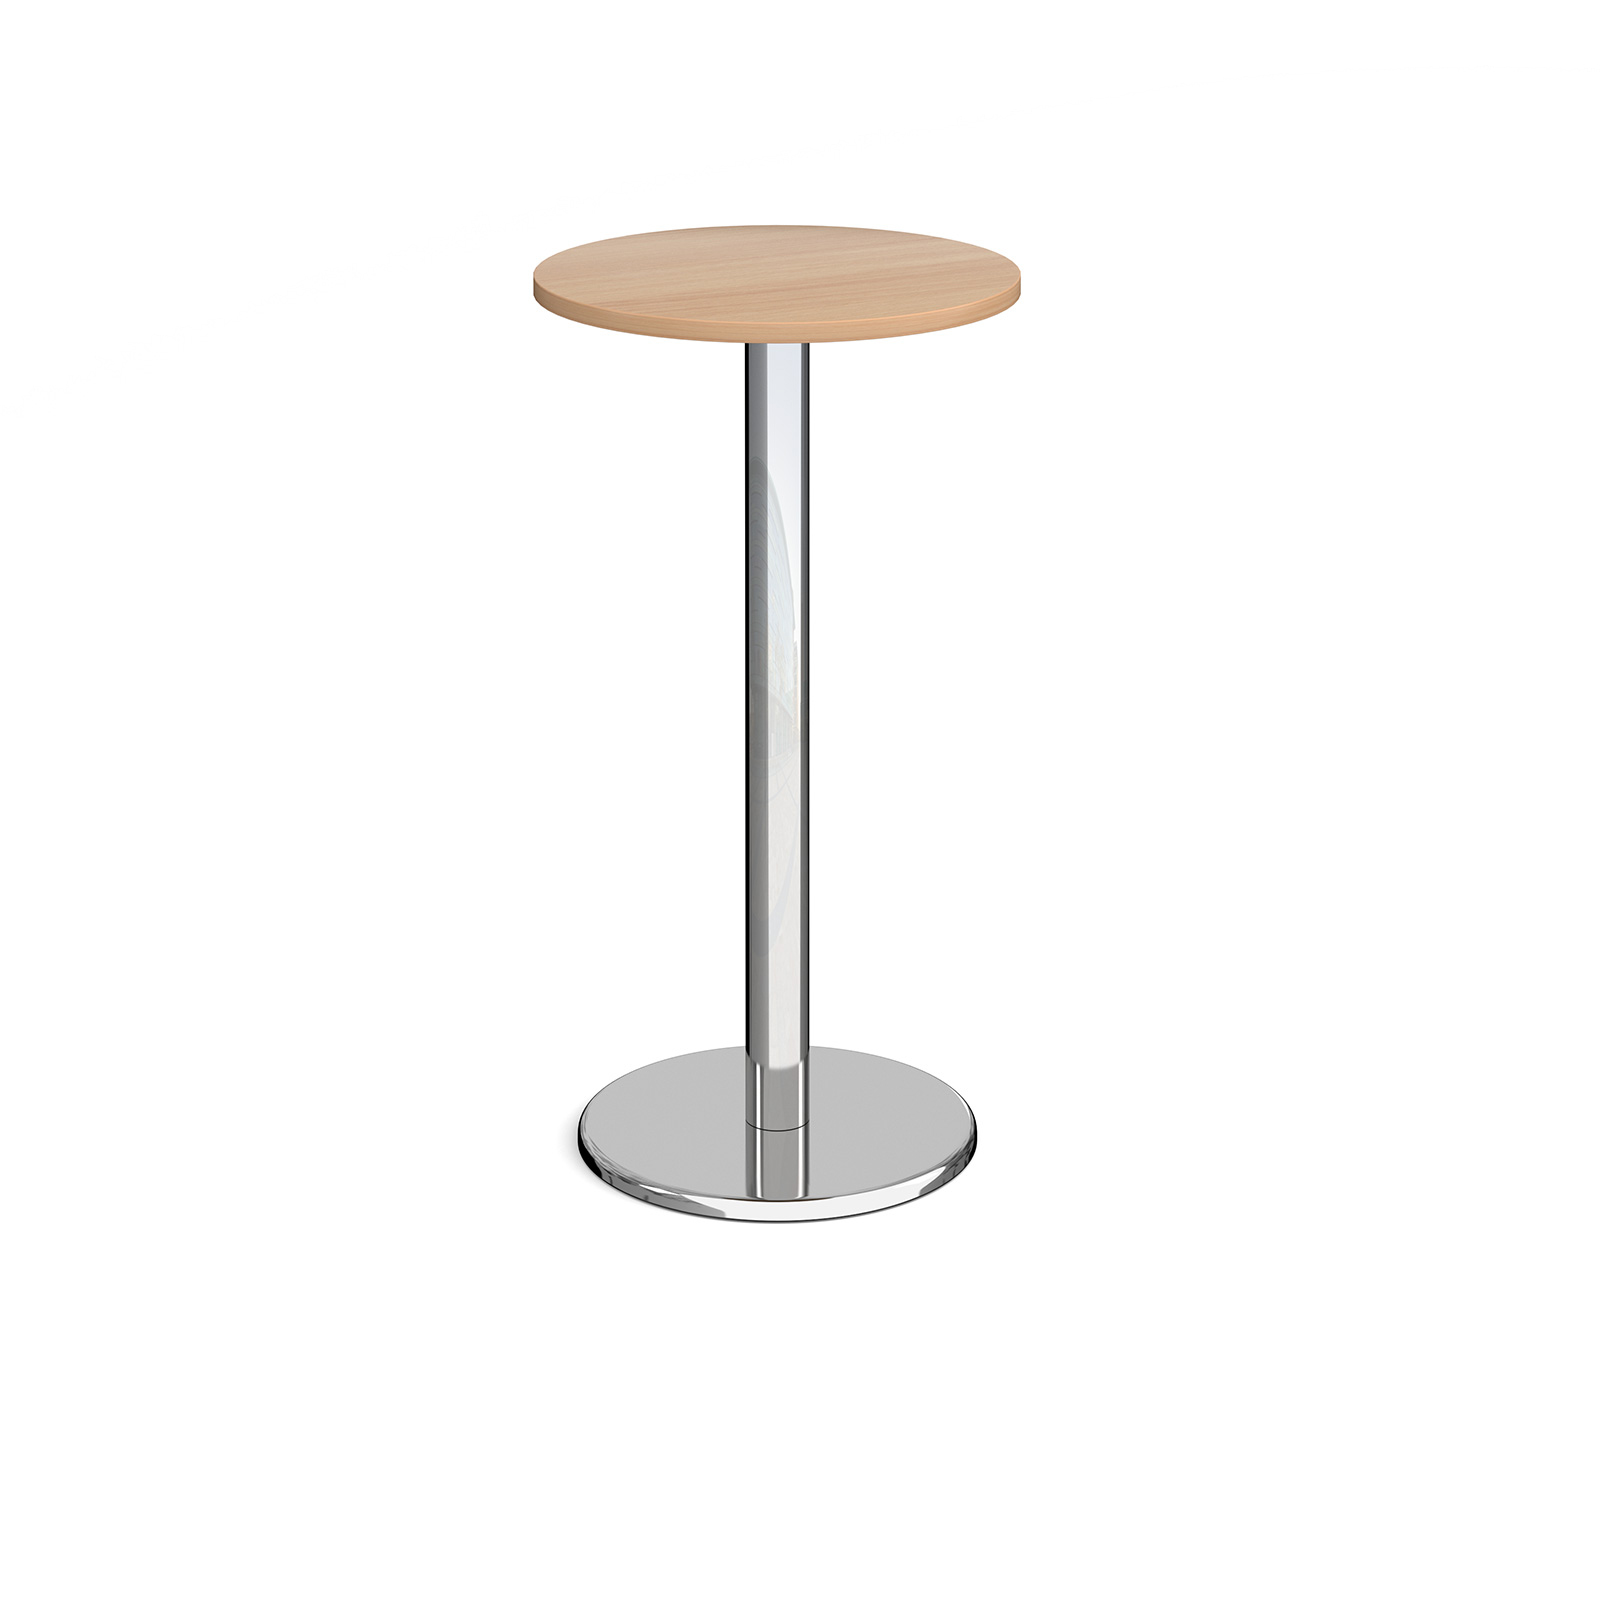 Pisa circular poseur table with round chrome base 600mm - beech